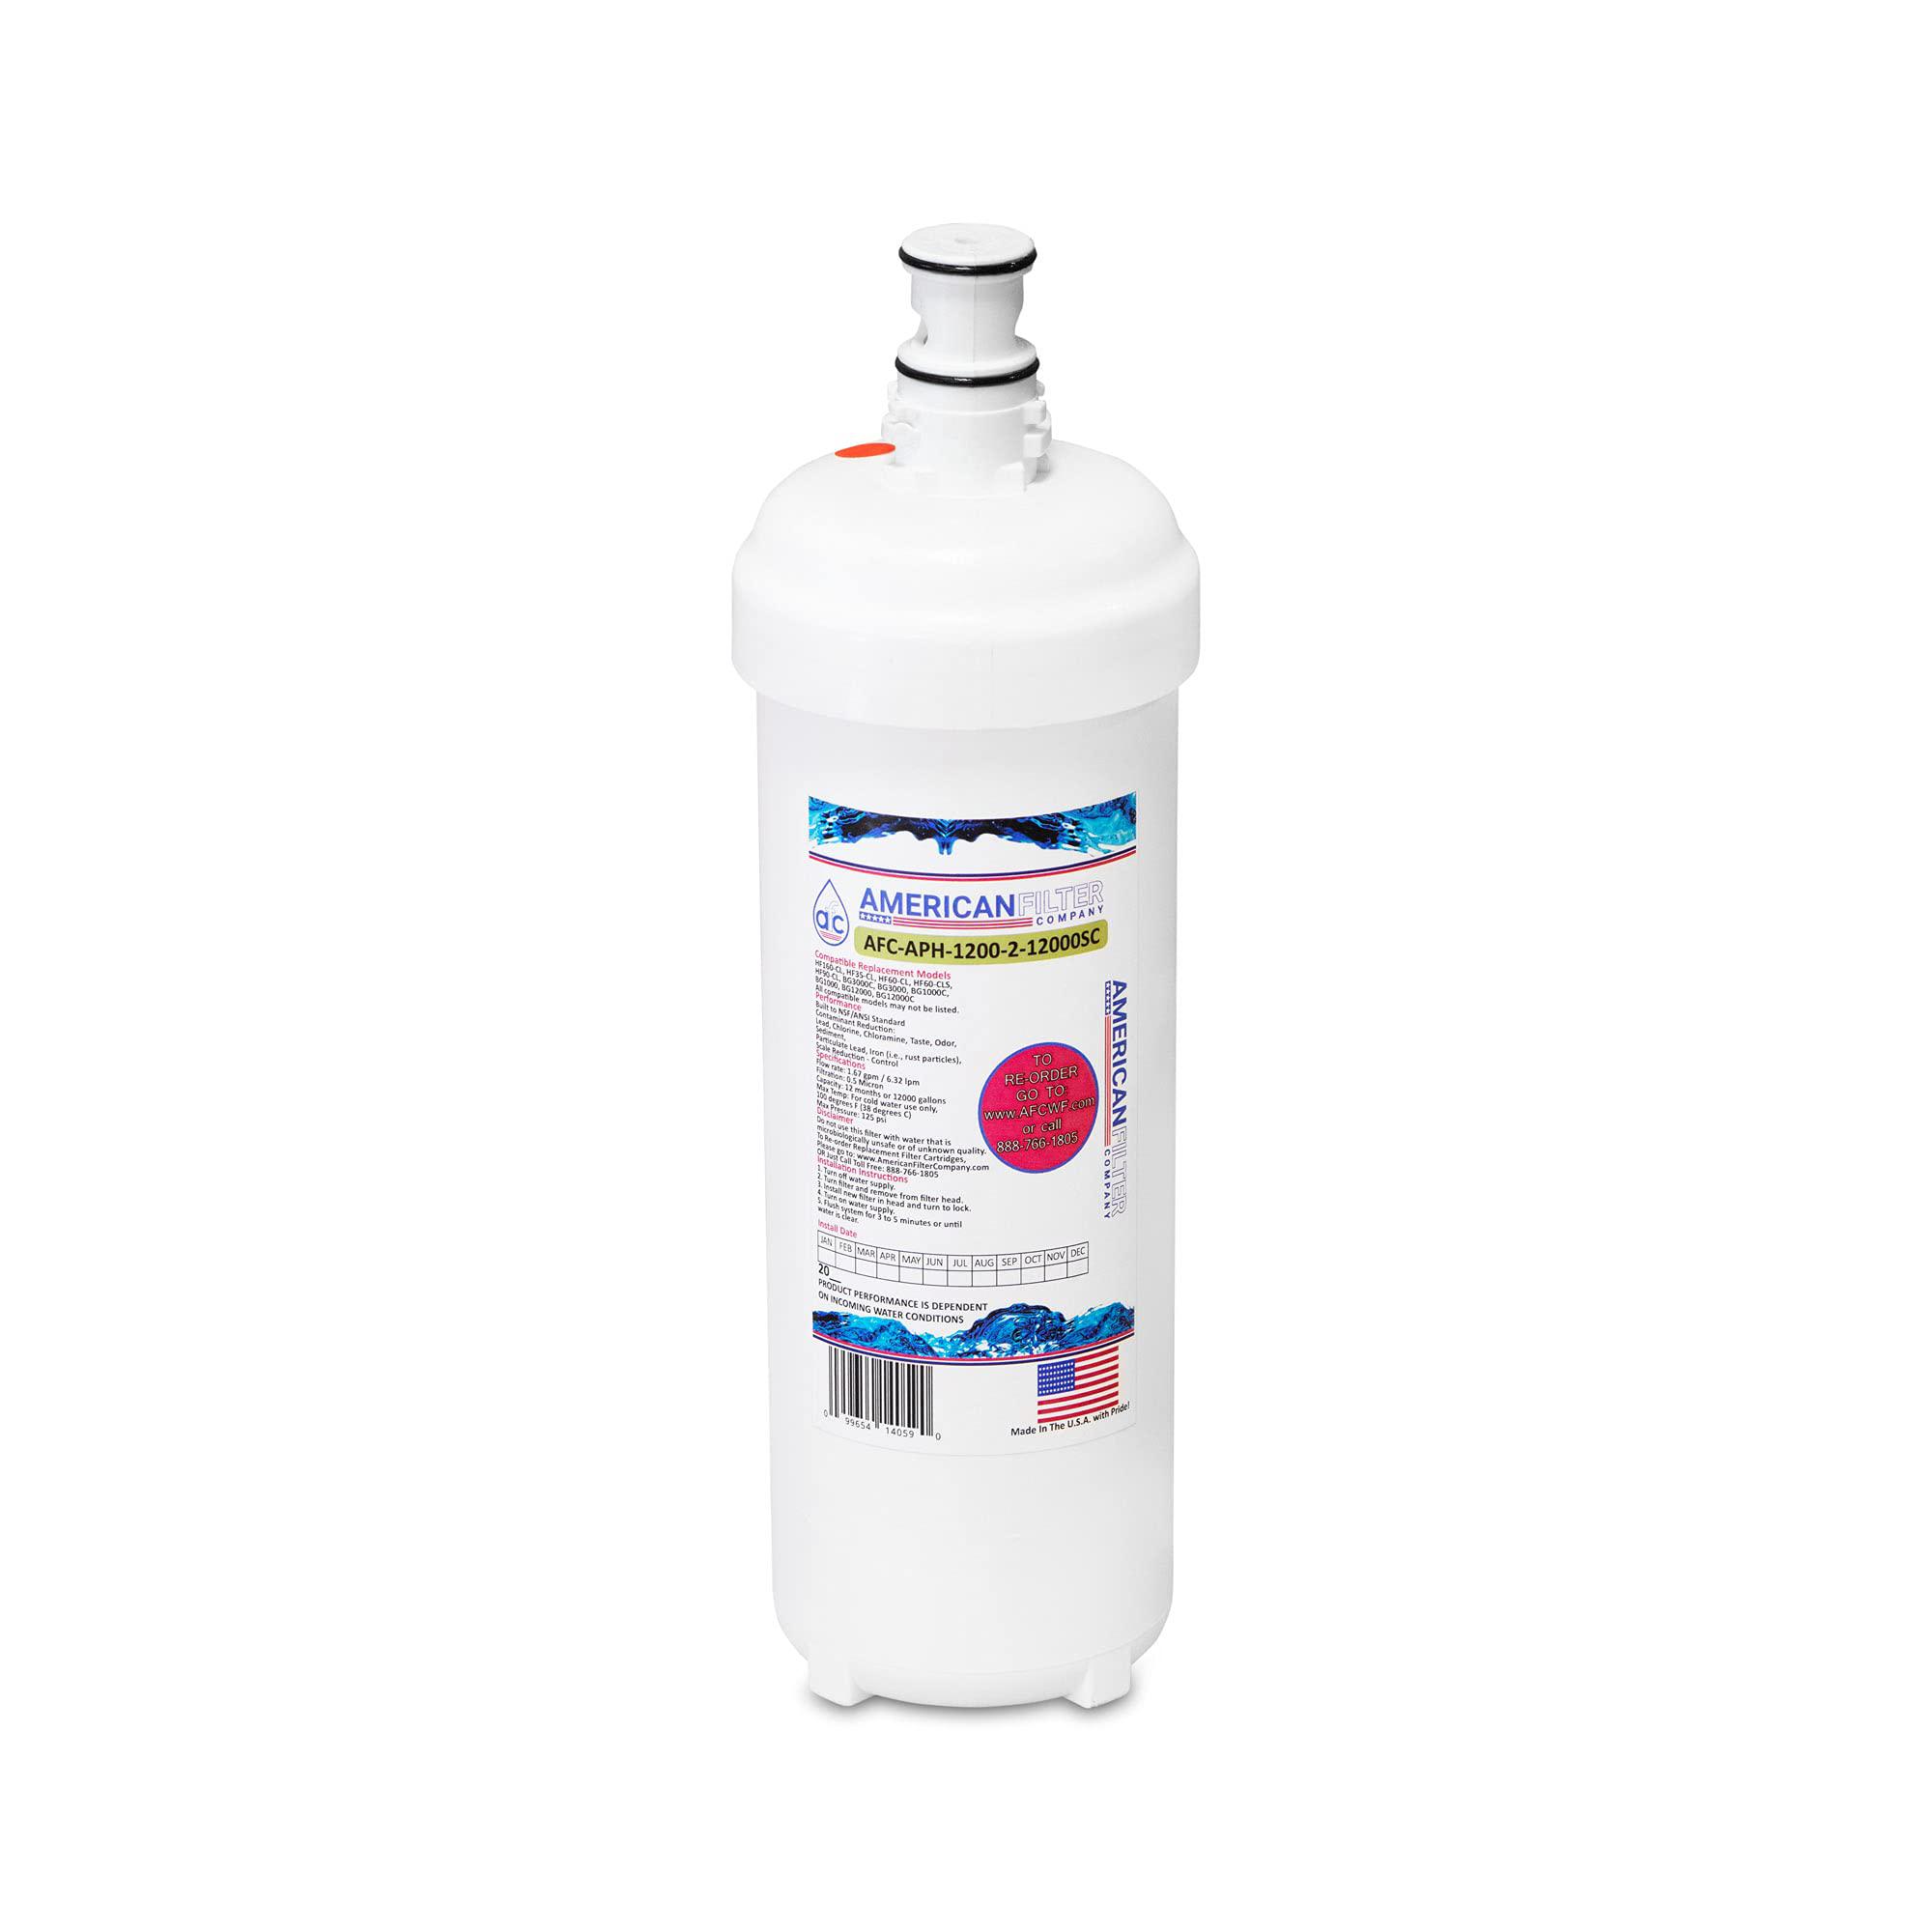 american filter company brand water filters afc-aph-1200-2-12000sc (comparable with body glove bg3000 water filter cartridge)